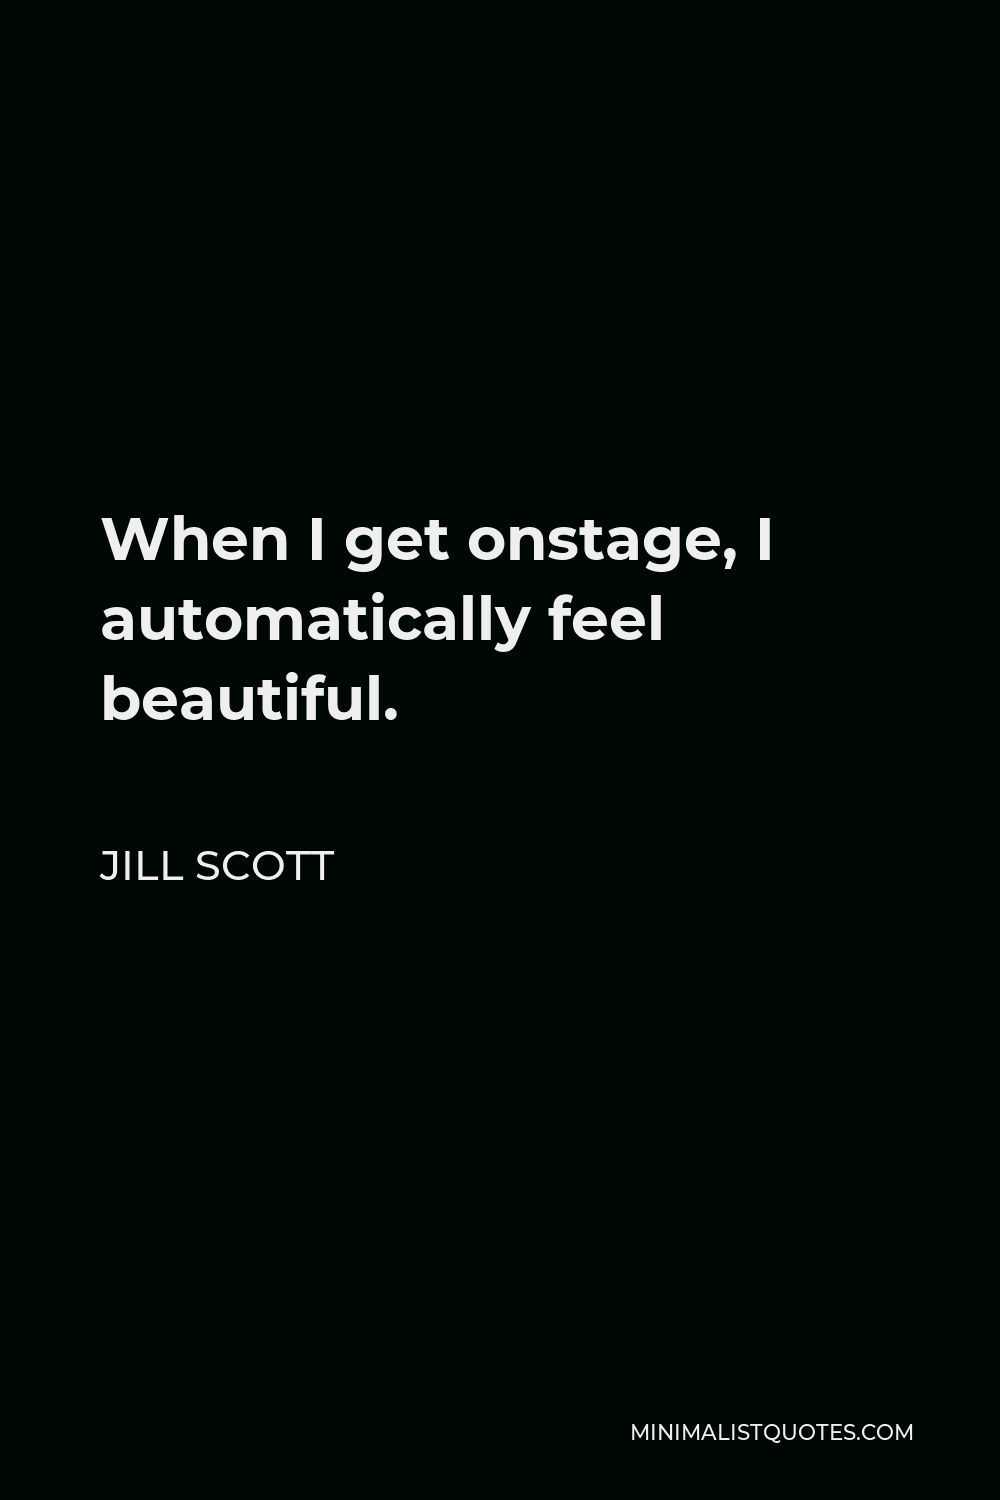 Jill Scott Quote - When I get onstage, I automatically feel beautiful.